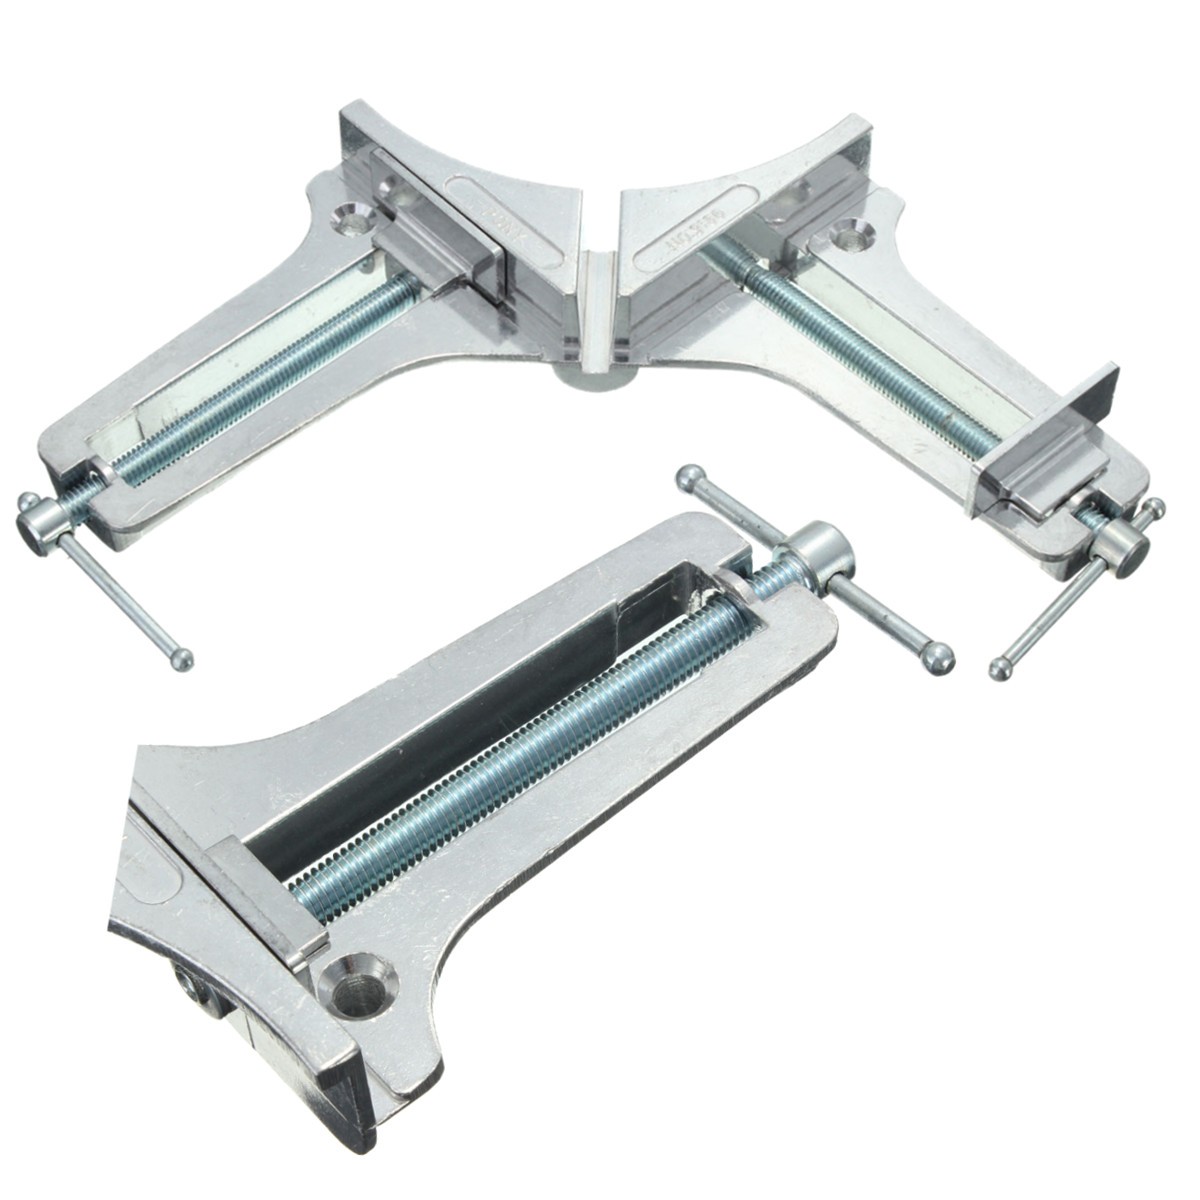 78CM-Enhanced-Aluminium-Corner-Clamps-Picture-Frame-Holder-Woodwork-Right-Angle-1136065